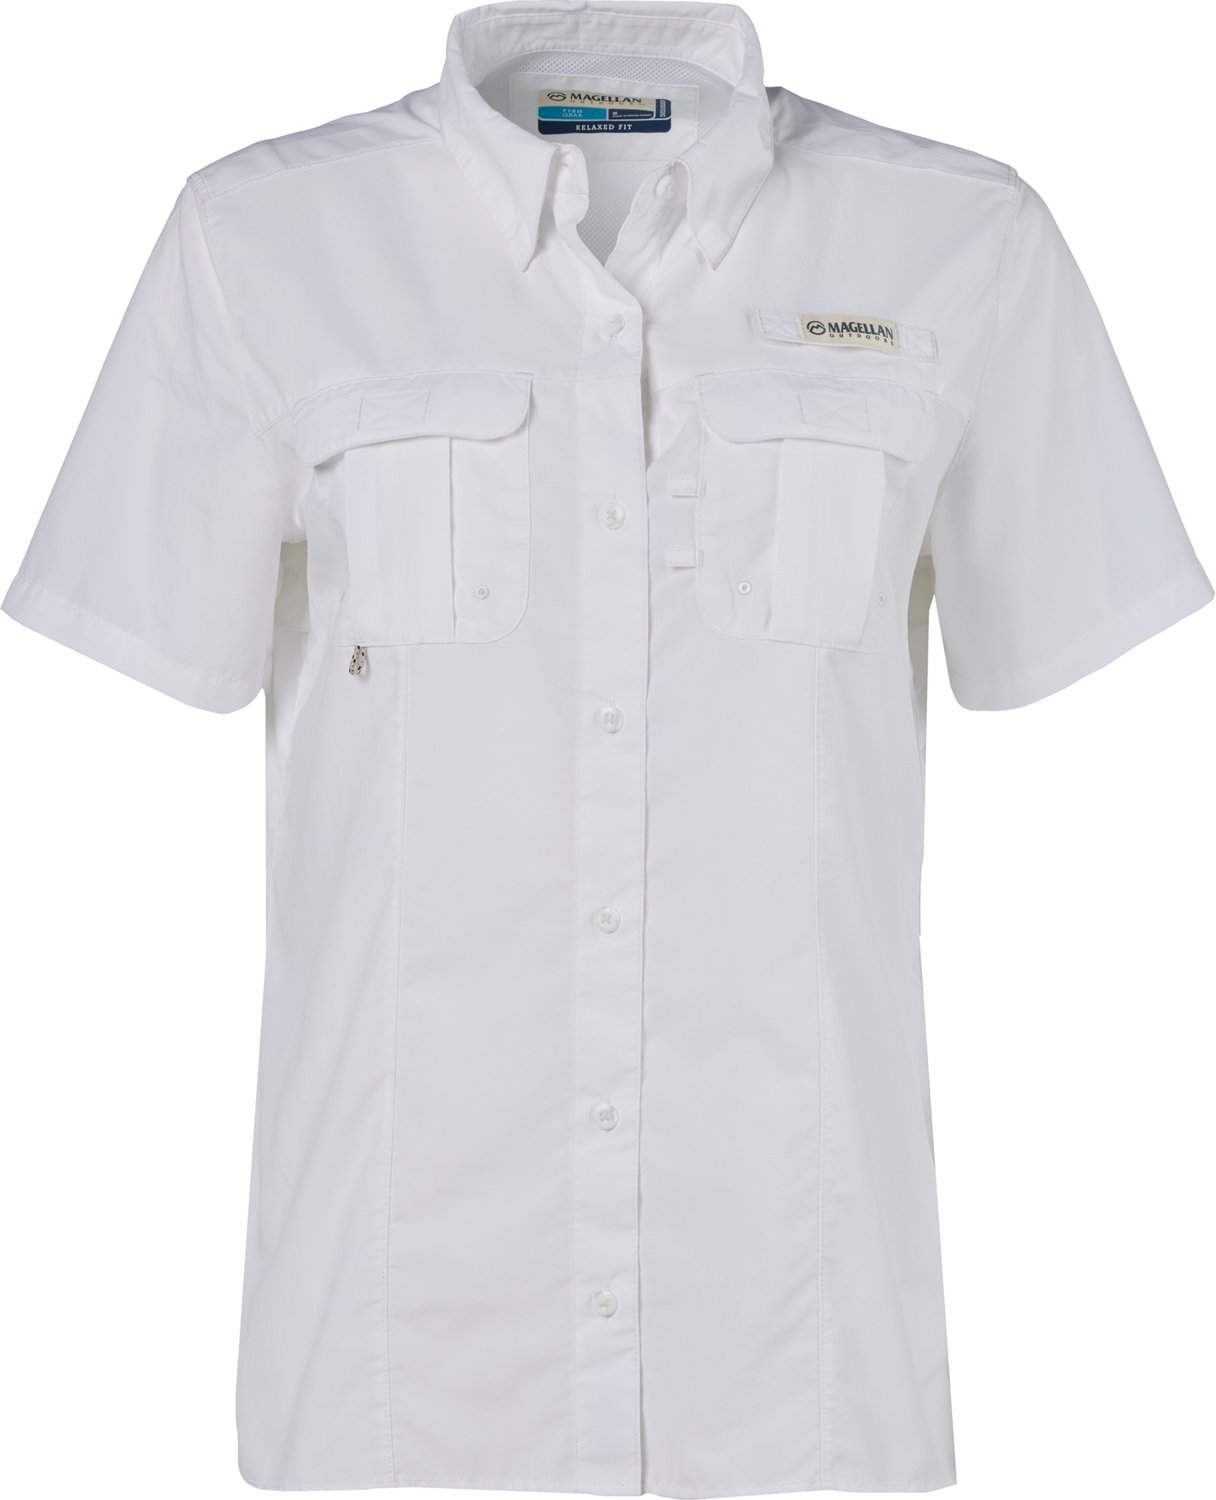 Women's Fishing Shirt in White by Lady Captain